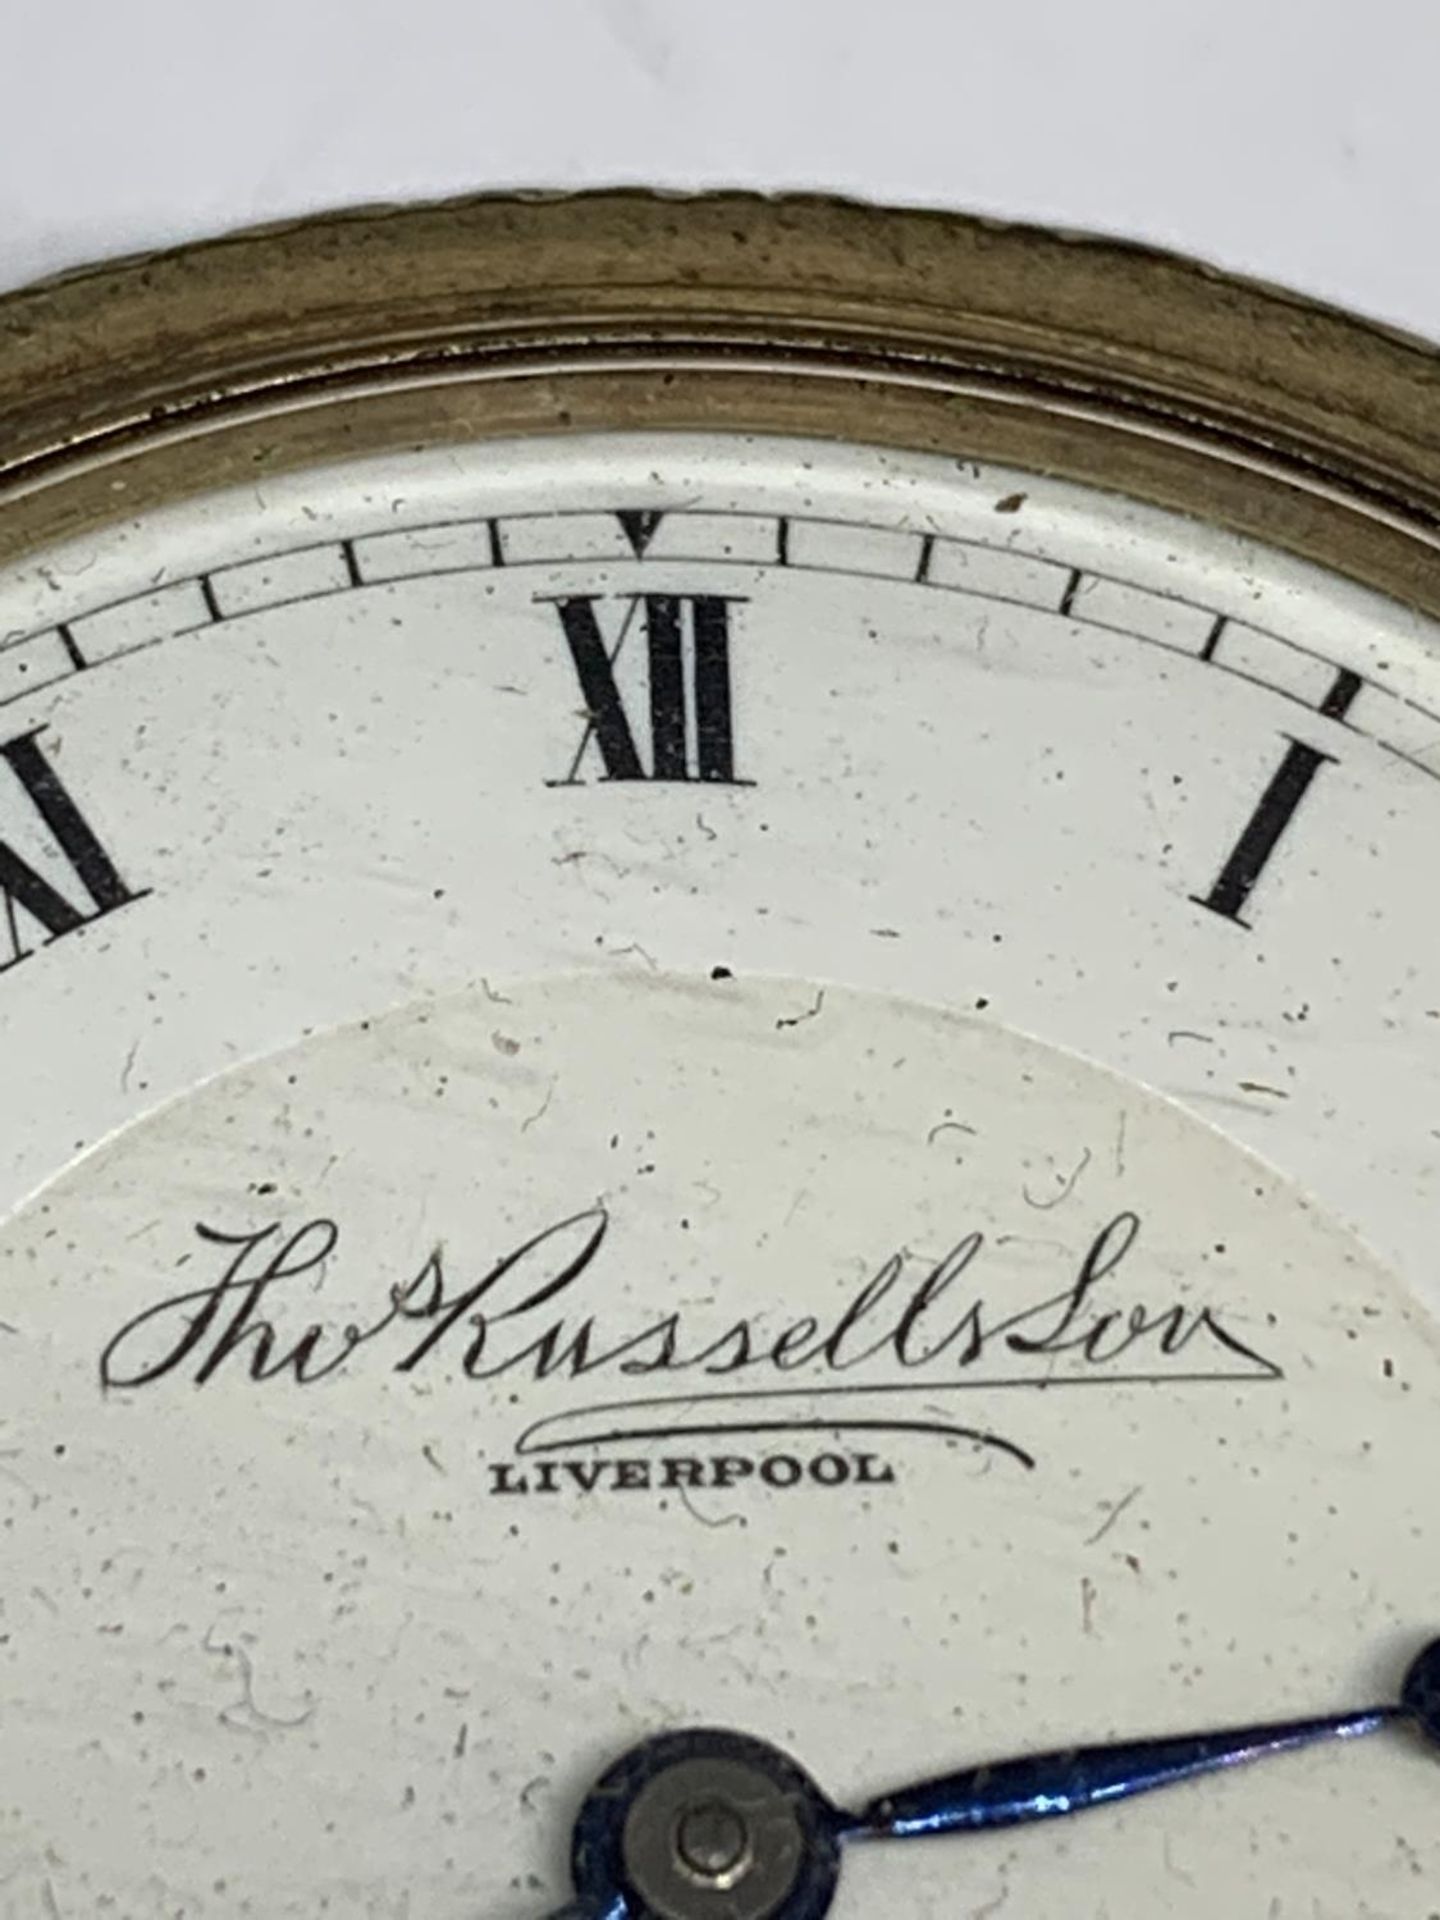 TWO POCKET WATCHES TO INCLUDE A THOS RUSSELL SON LIVERPOOL AND AN IVY - Image 3 of 6